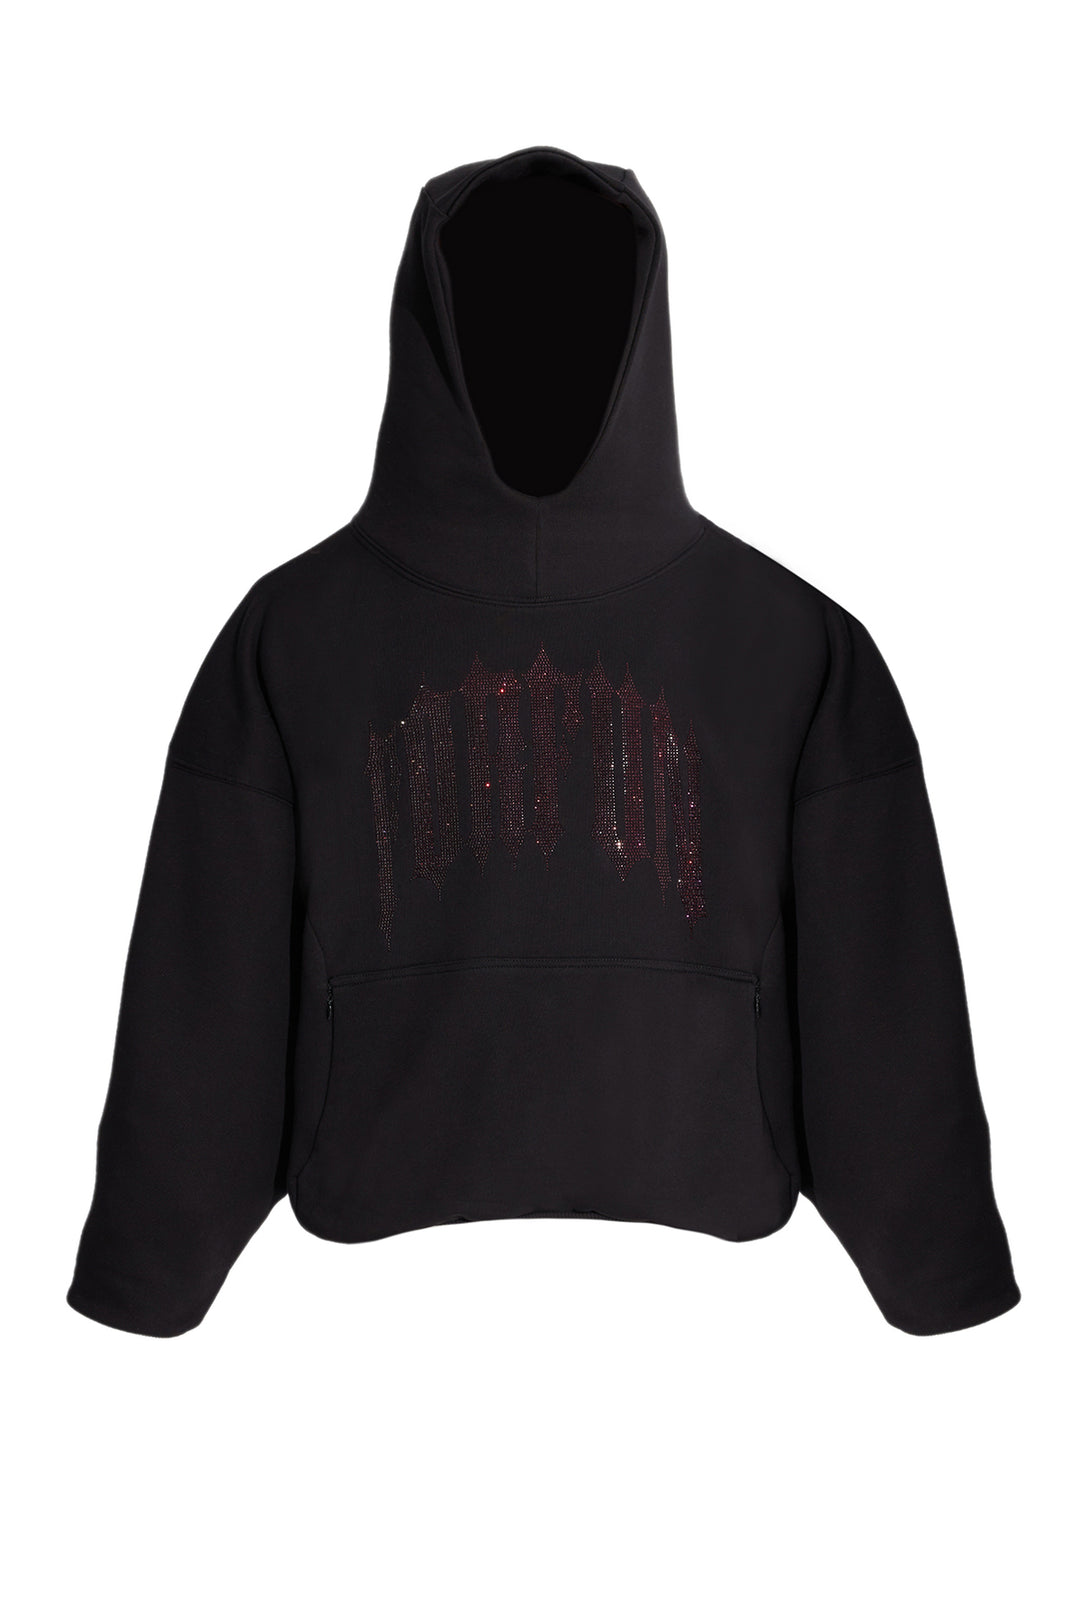 For Fun / Oversized Double Layer Rhinestone Pullover Hoodie